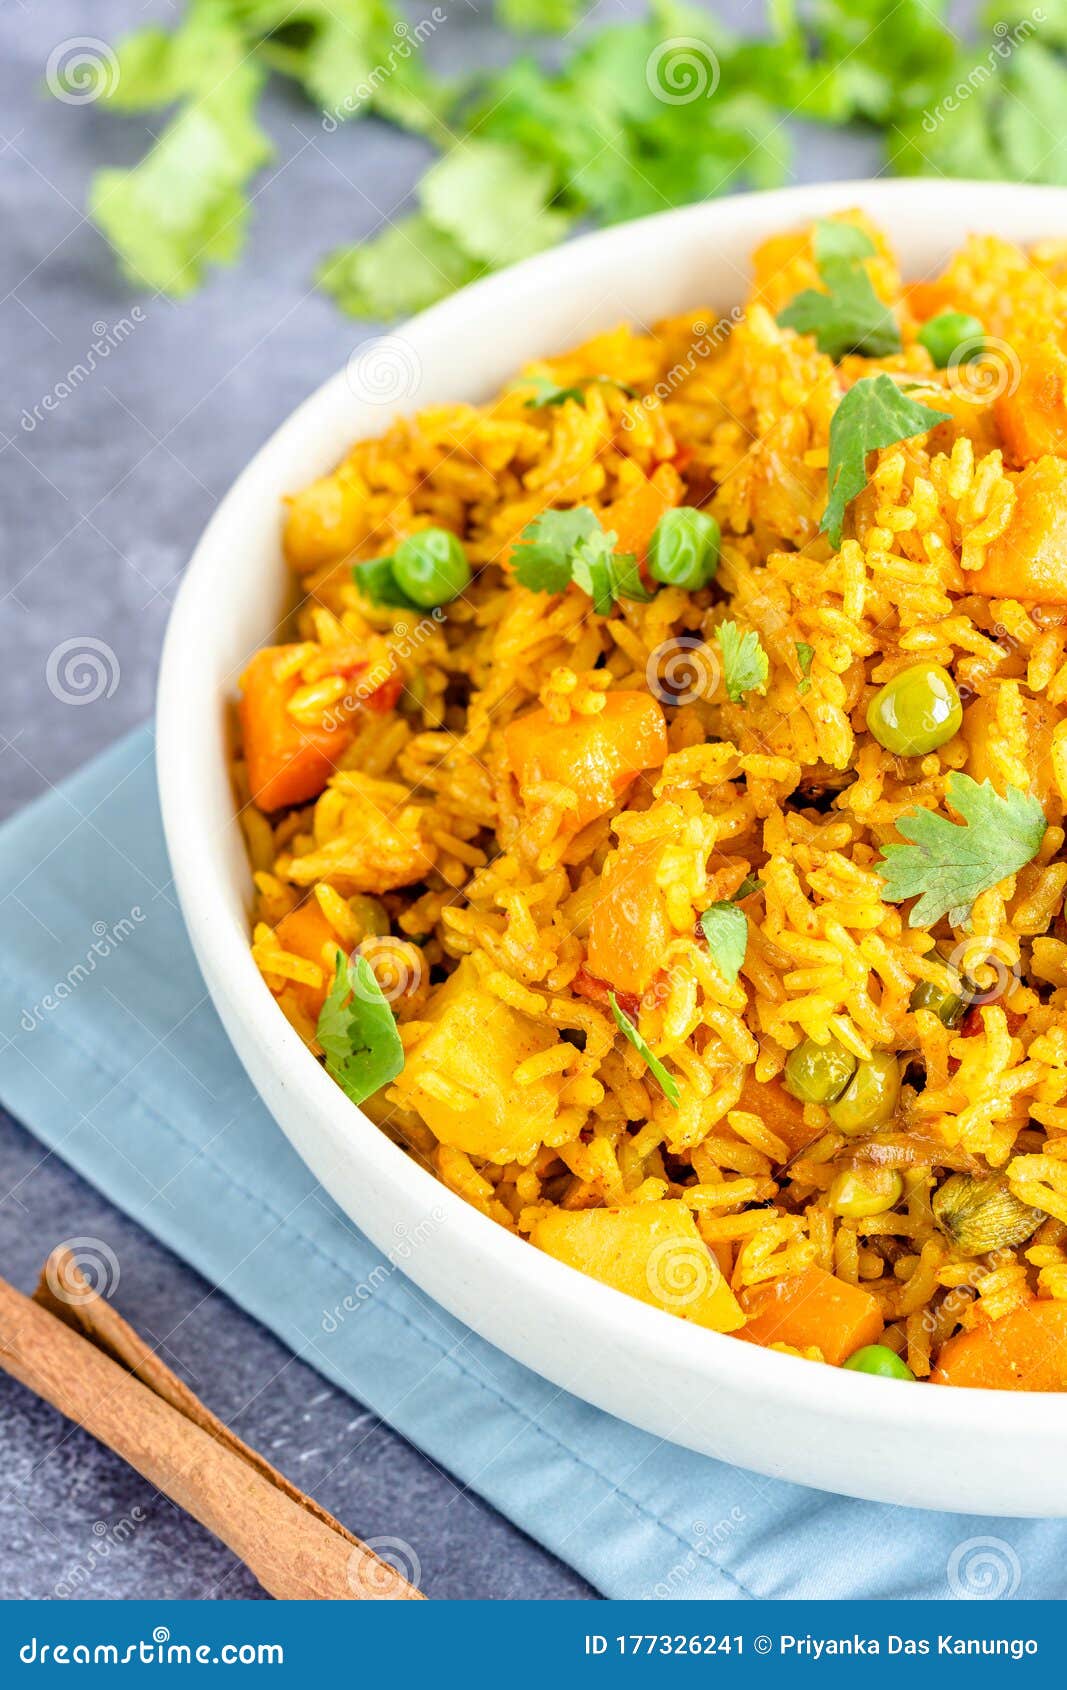 Indian One Pot Vegetable Pilaf Vertical Photo Stock Image - Image of ...